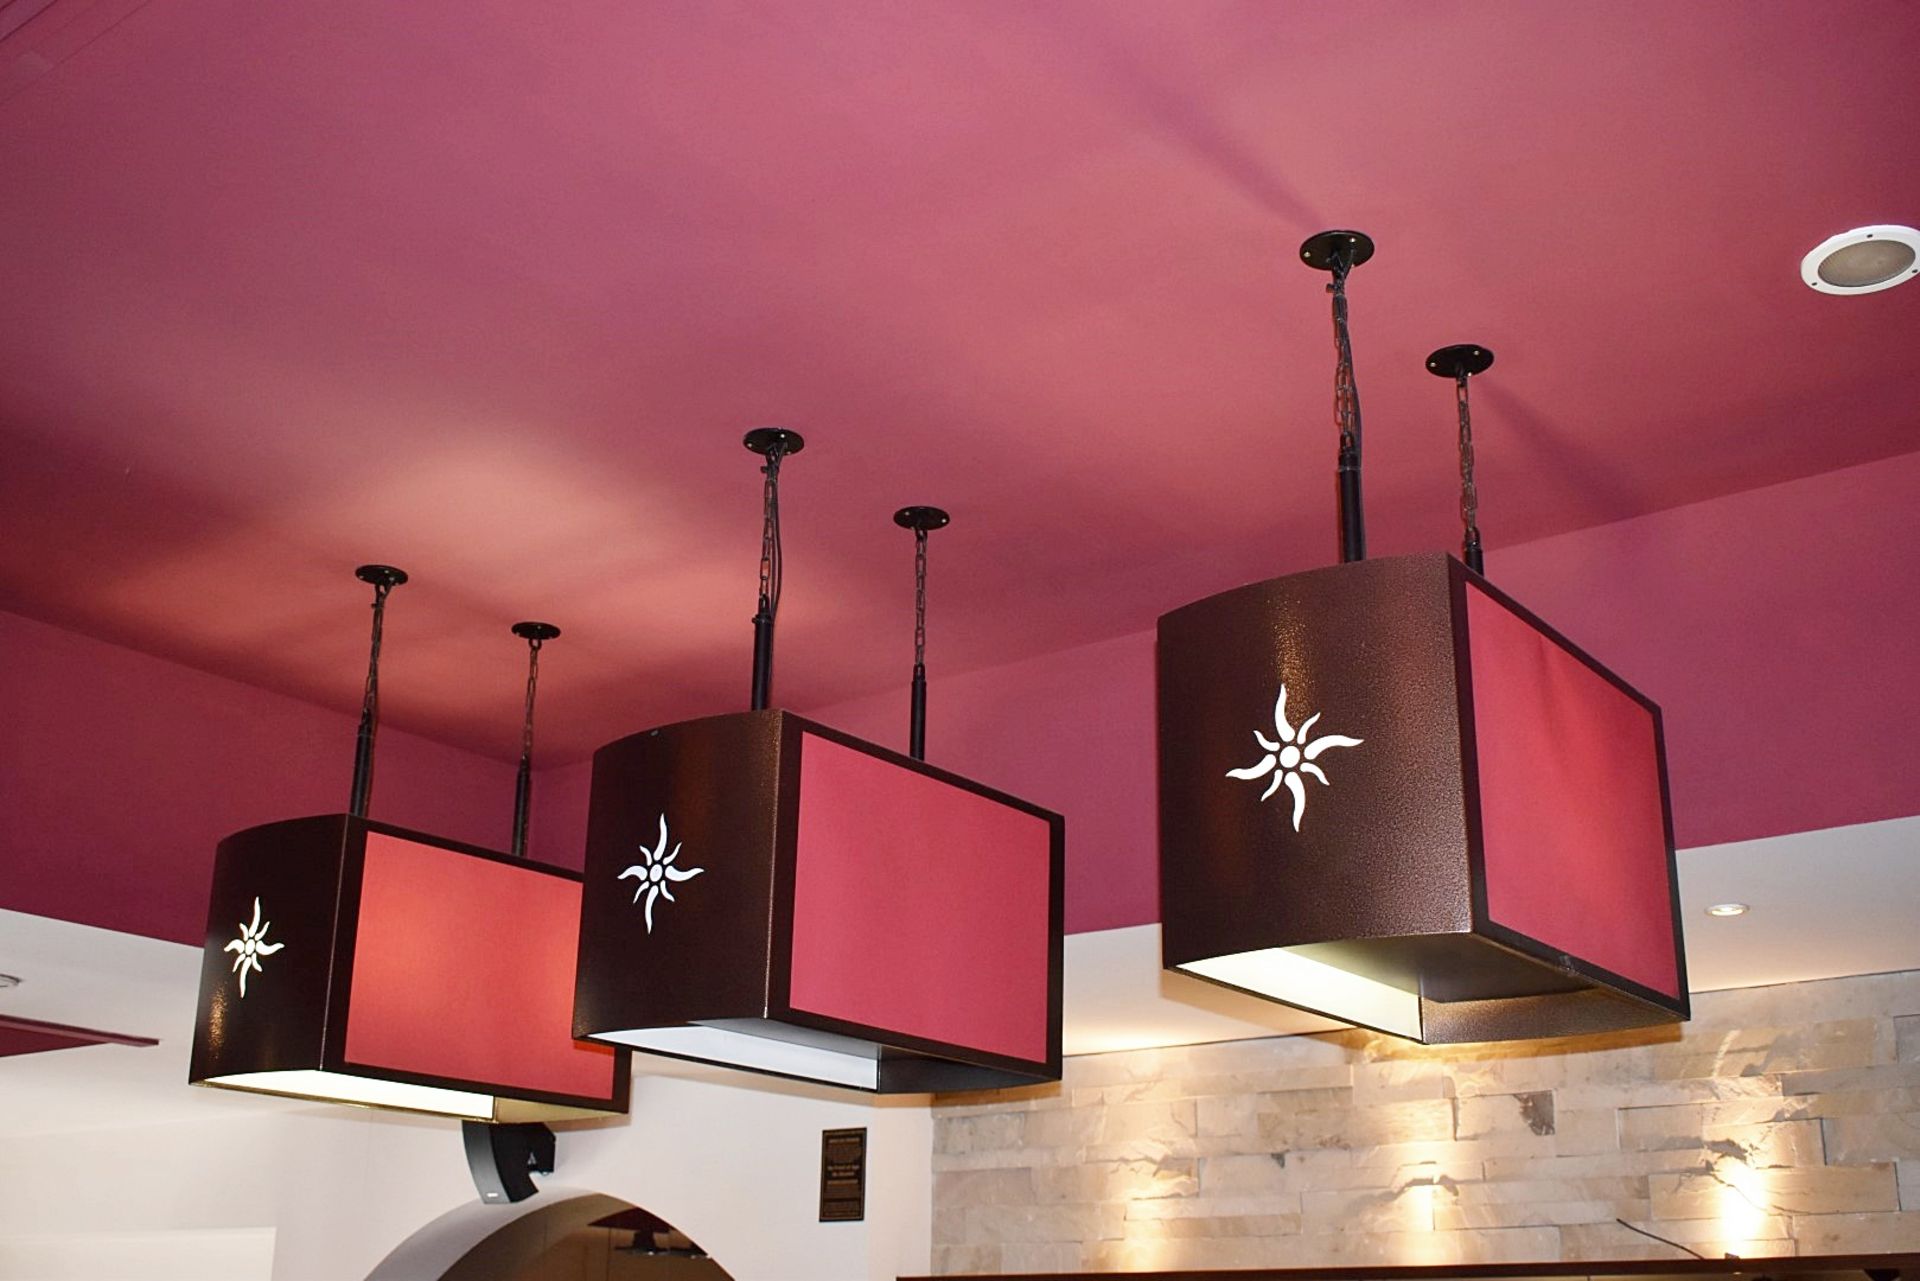 3 x Contemporary Suspended Ceiling Lights in Brown With Cut Out Star Design & Red Fabric Shade Sides